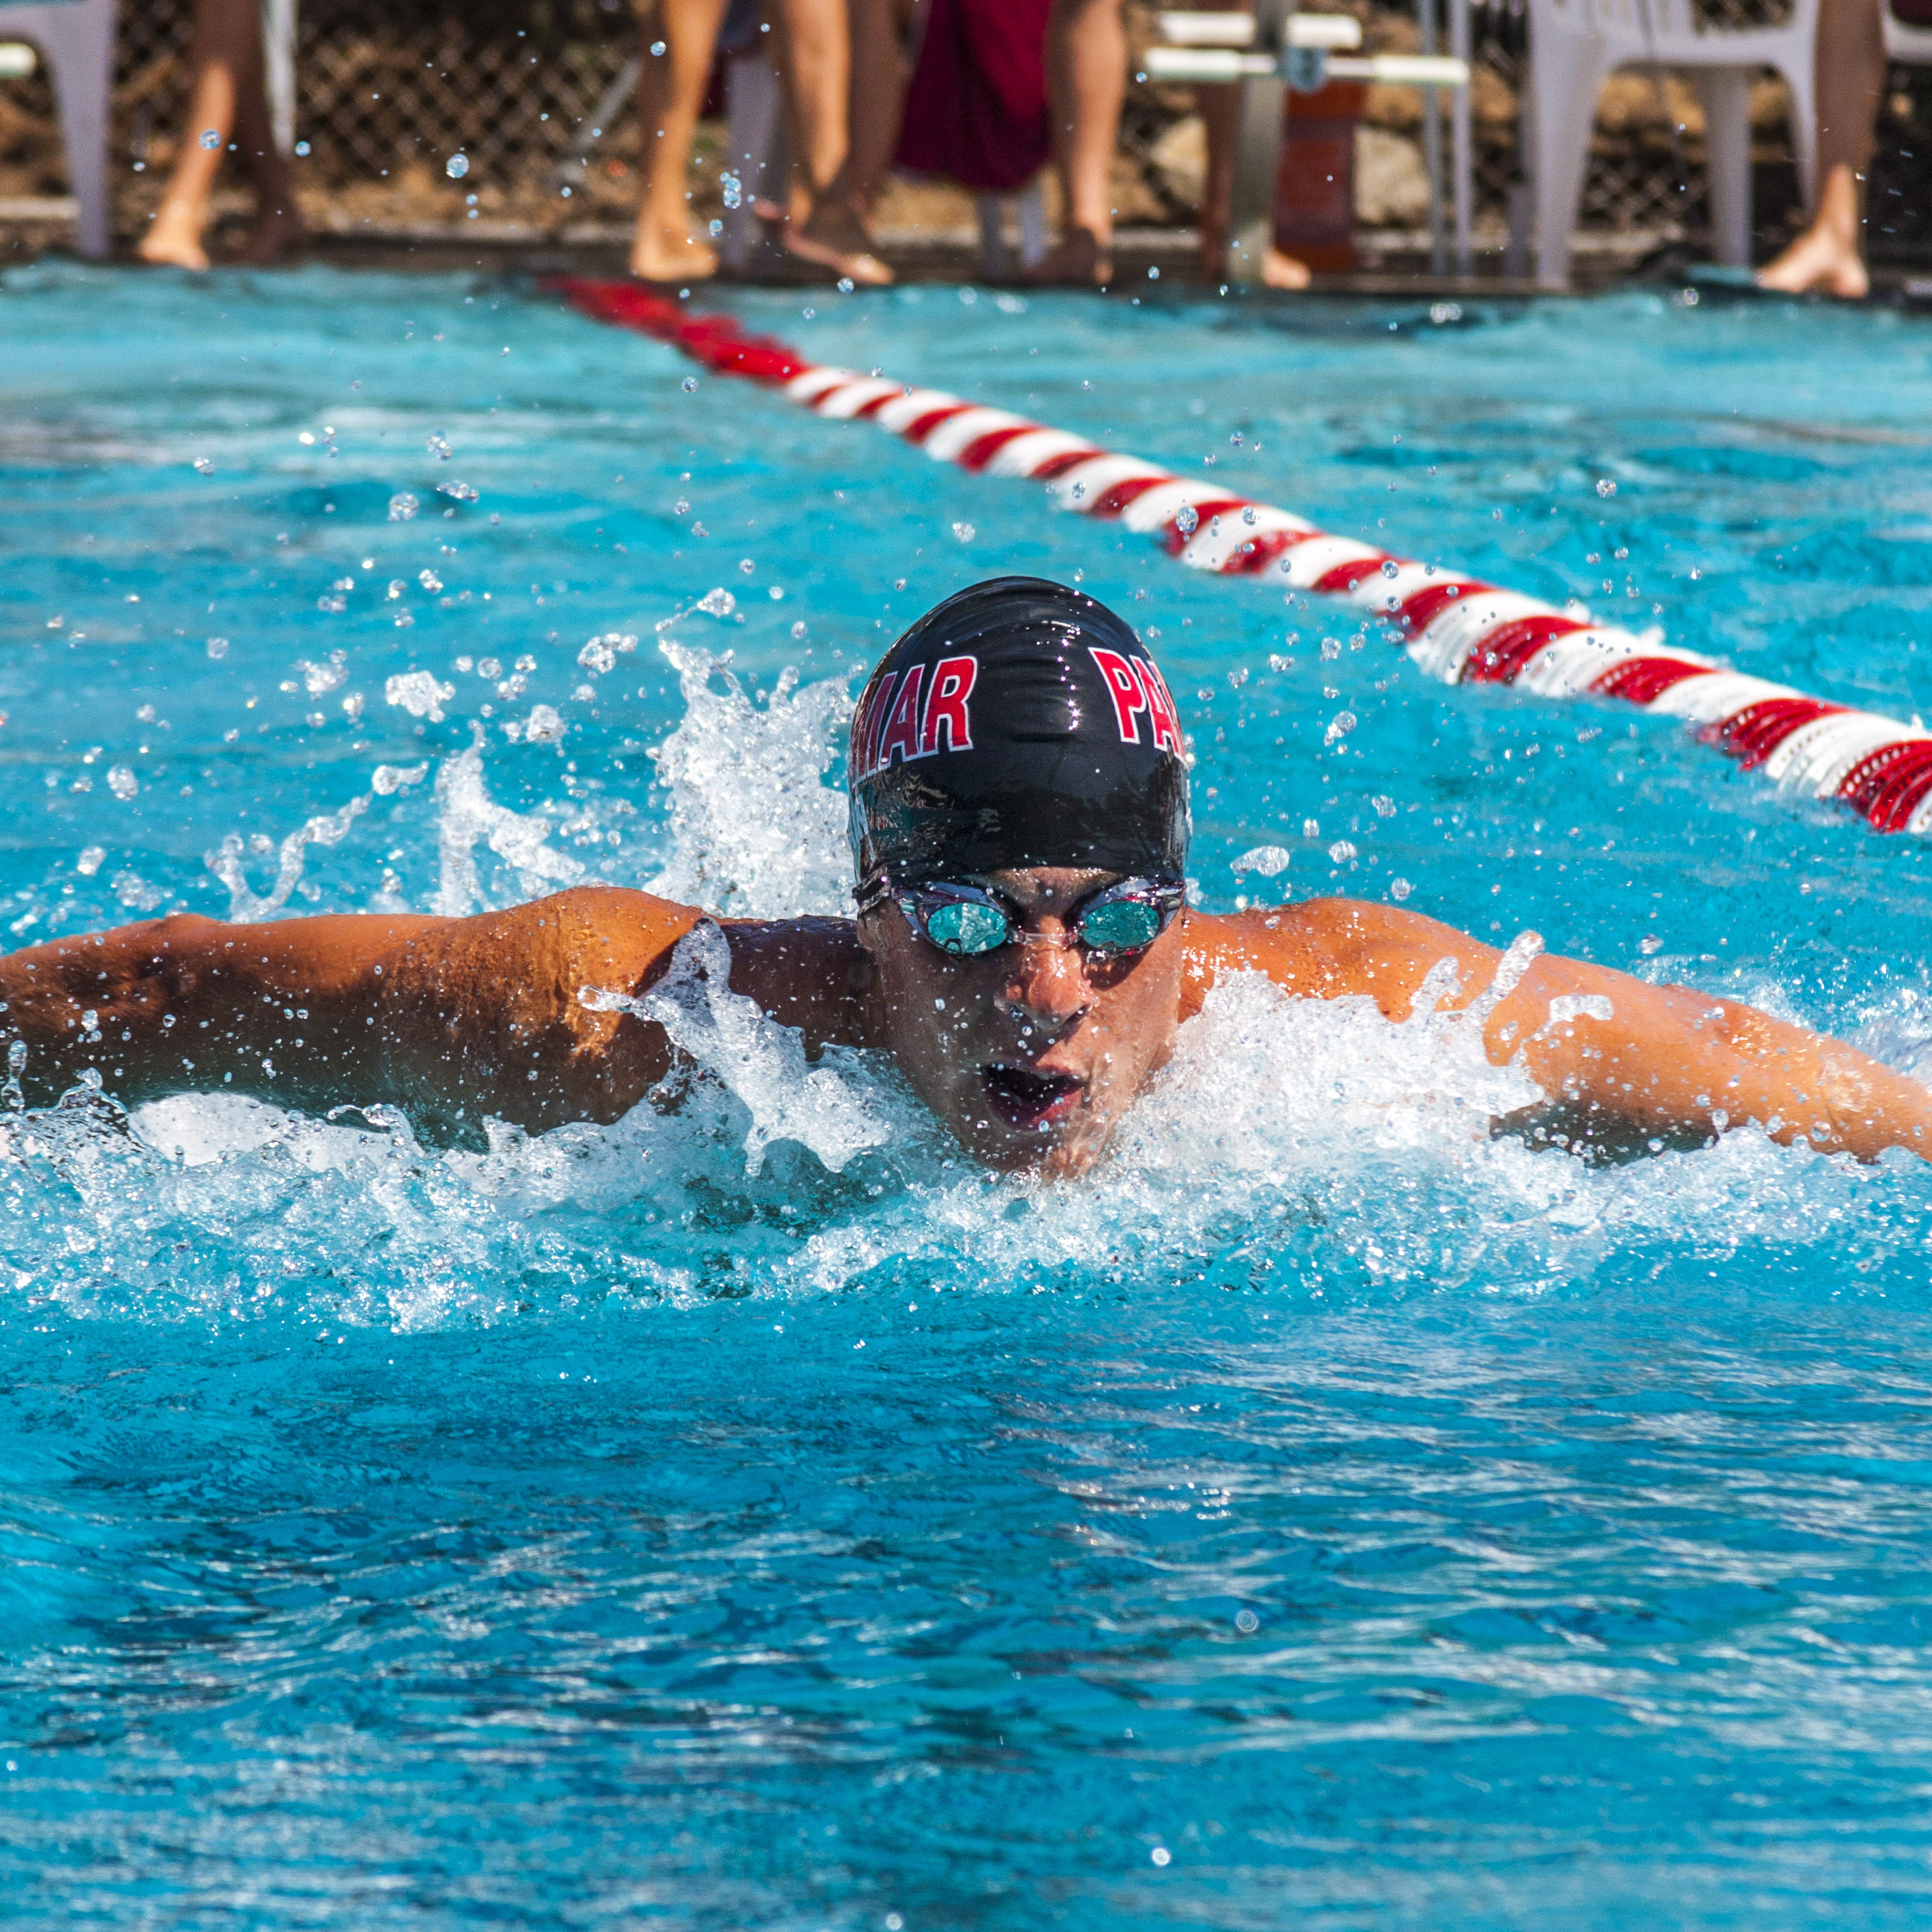 Joe Cain of Palomar College's men's relay team swims the butterfly during the men's 200-yard medley against Grossmont on March 14, 2014 at the Wallace Memorial Pool. (Lucas Spenser/Telescope)